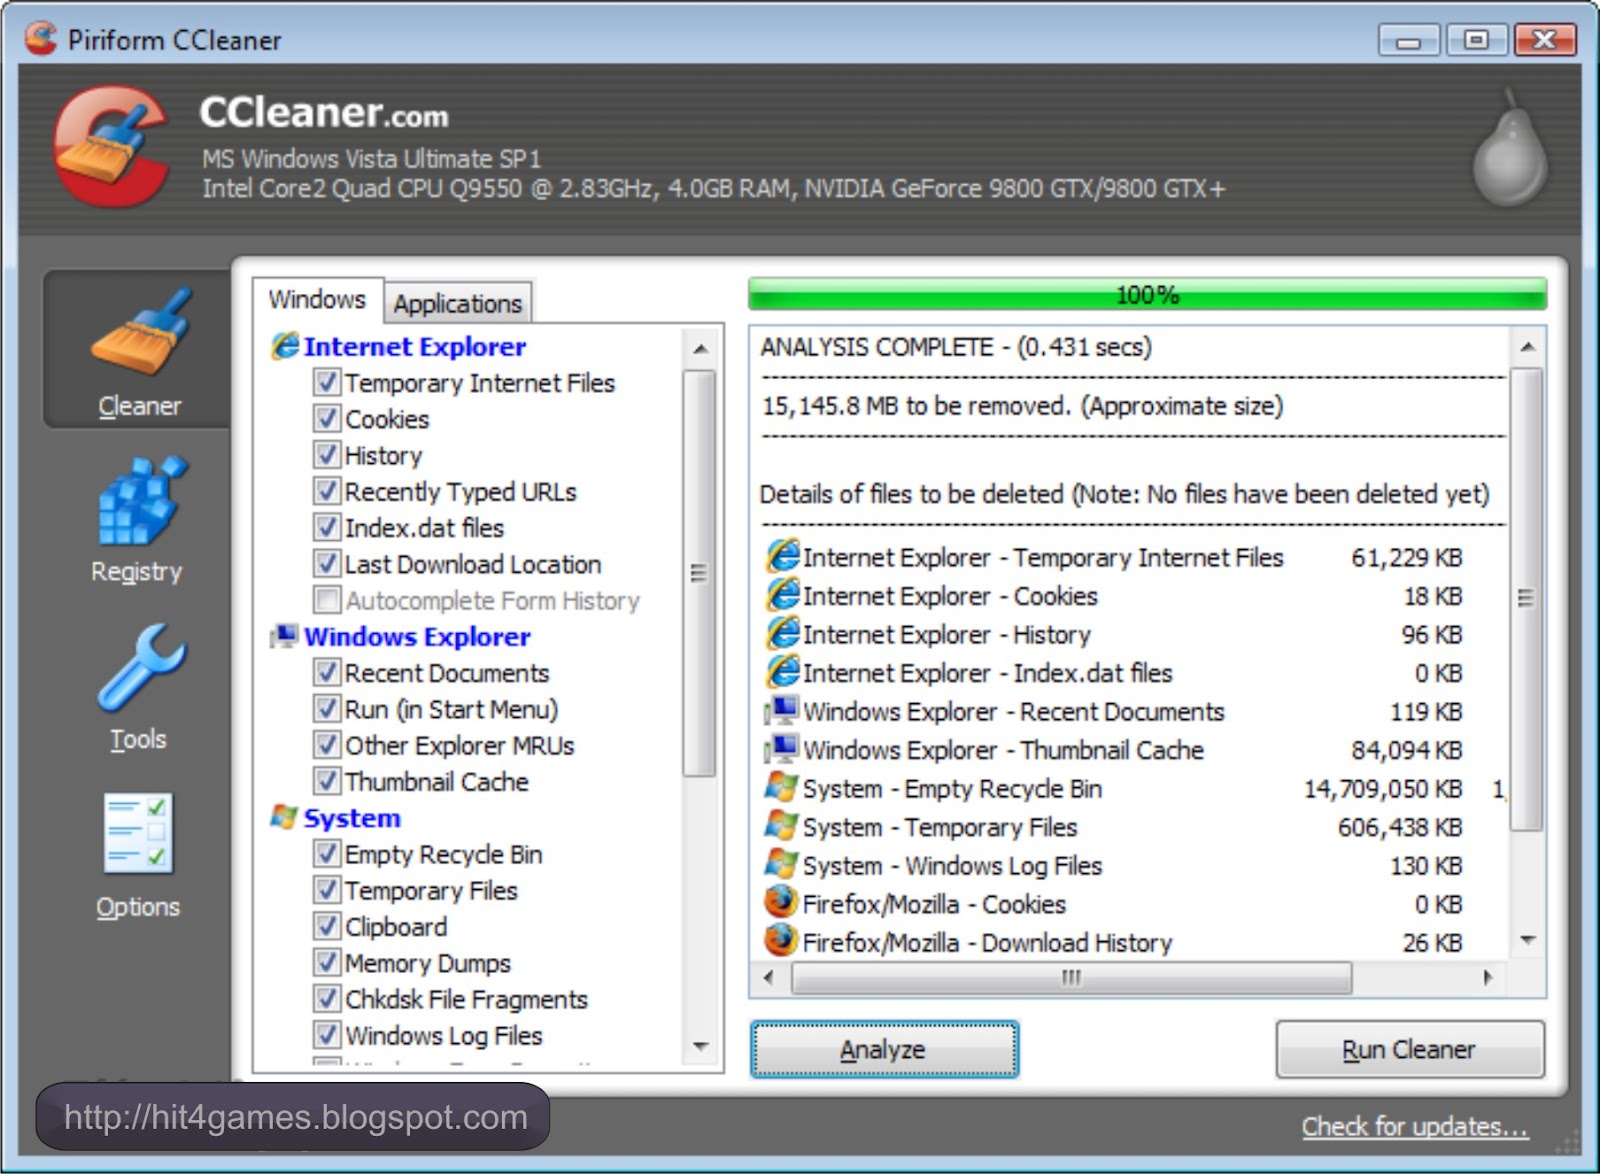 Free download ccleaner for windows 10 - Windows bit free diferencia entre ccleaner free y pro libras mes winrar windows